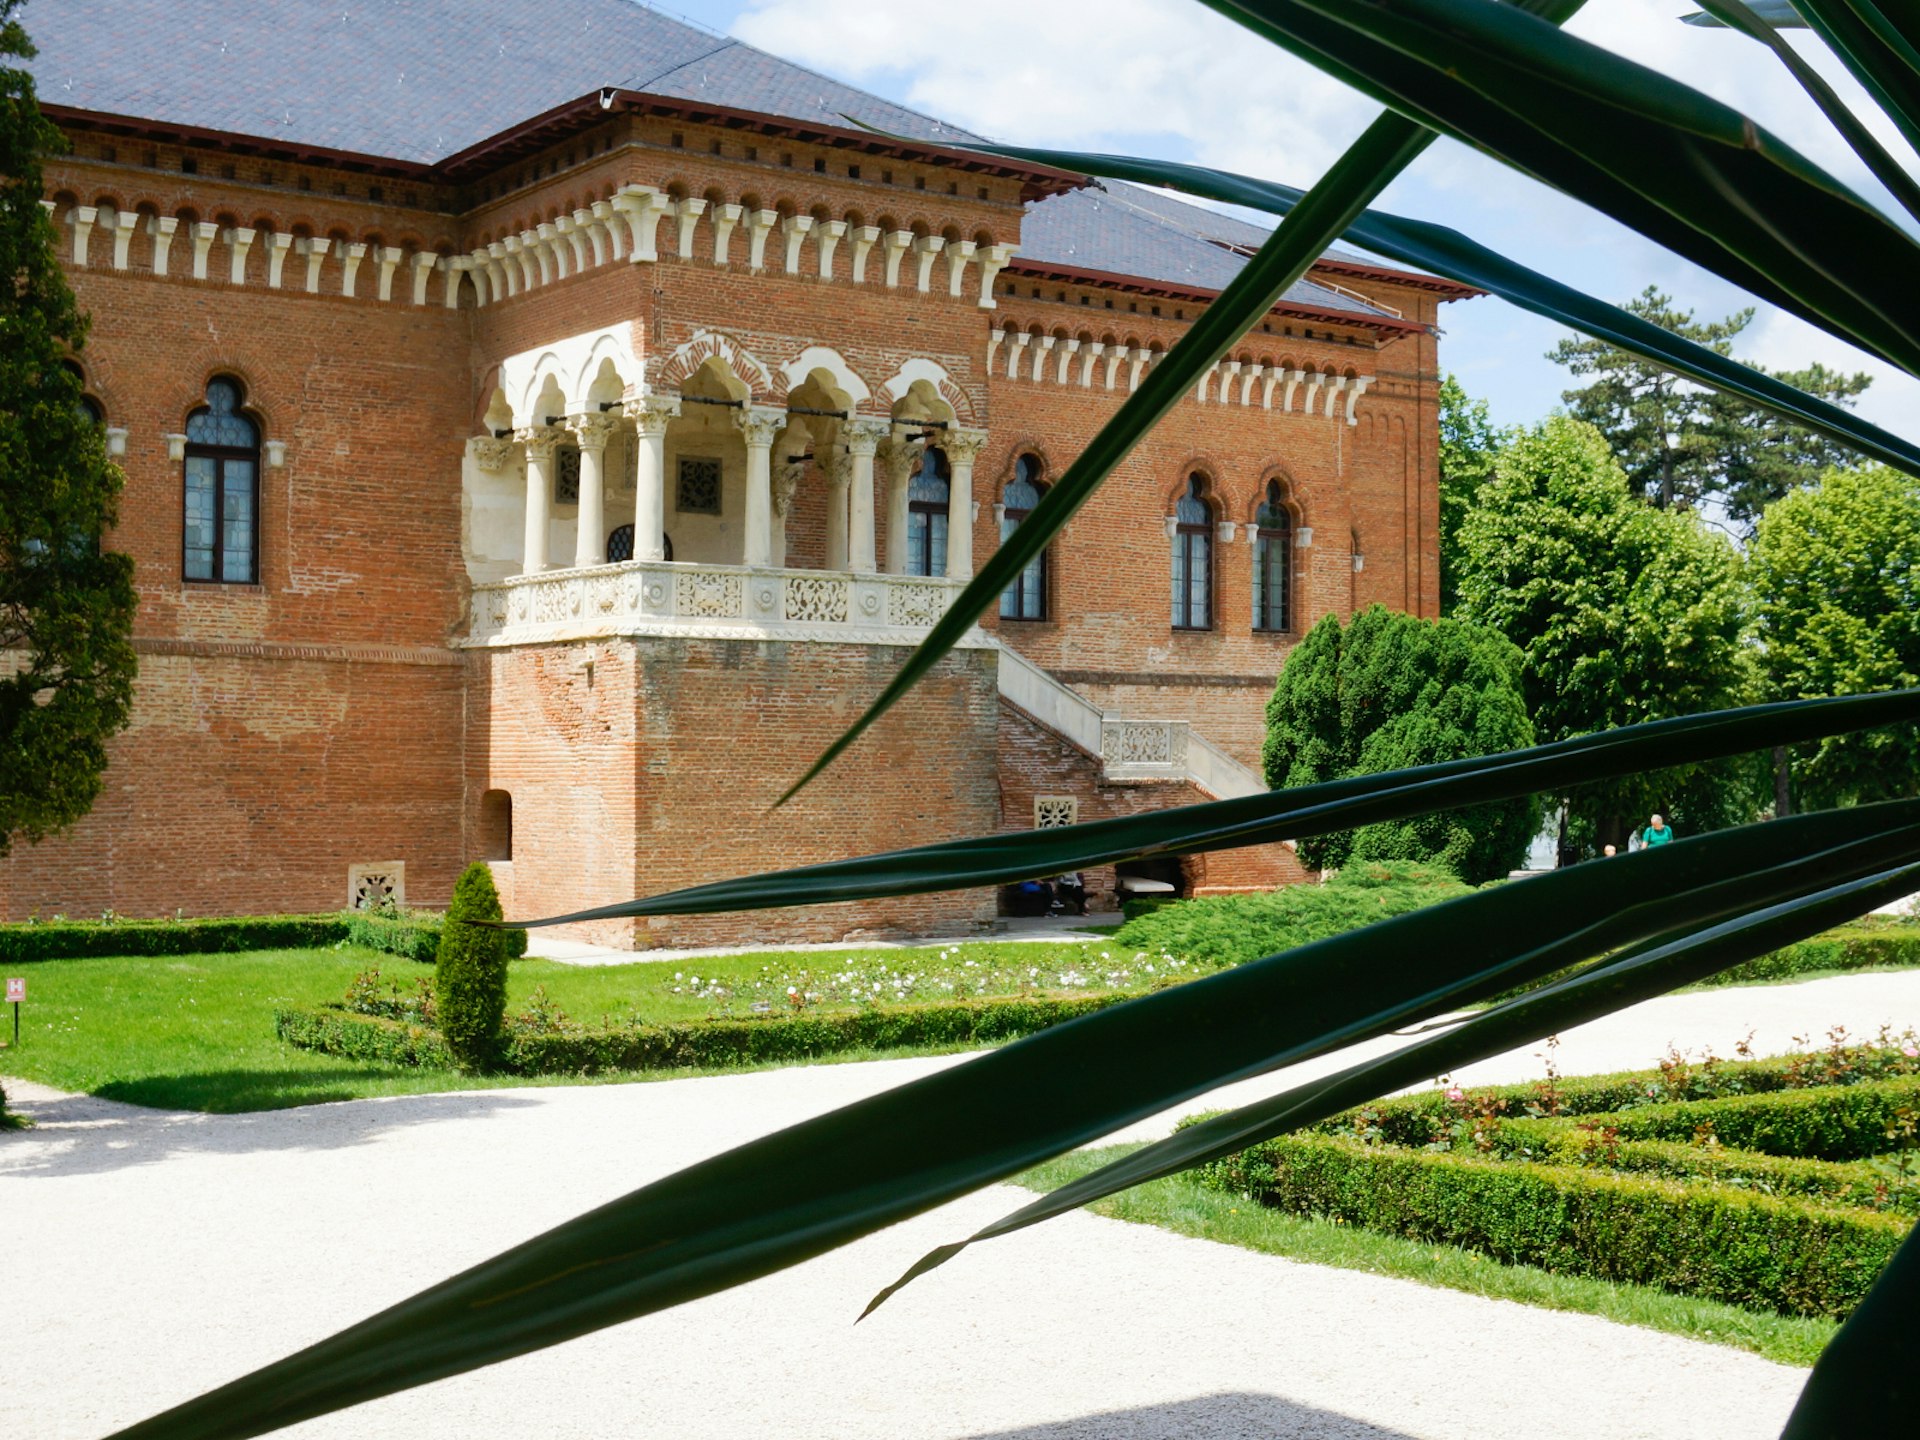 Exterior of the Mogoşoaia Palace, outside Bucharest, seen from the courtyard